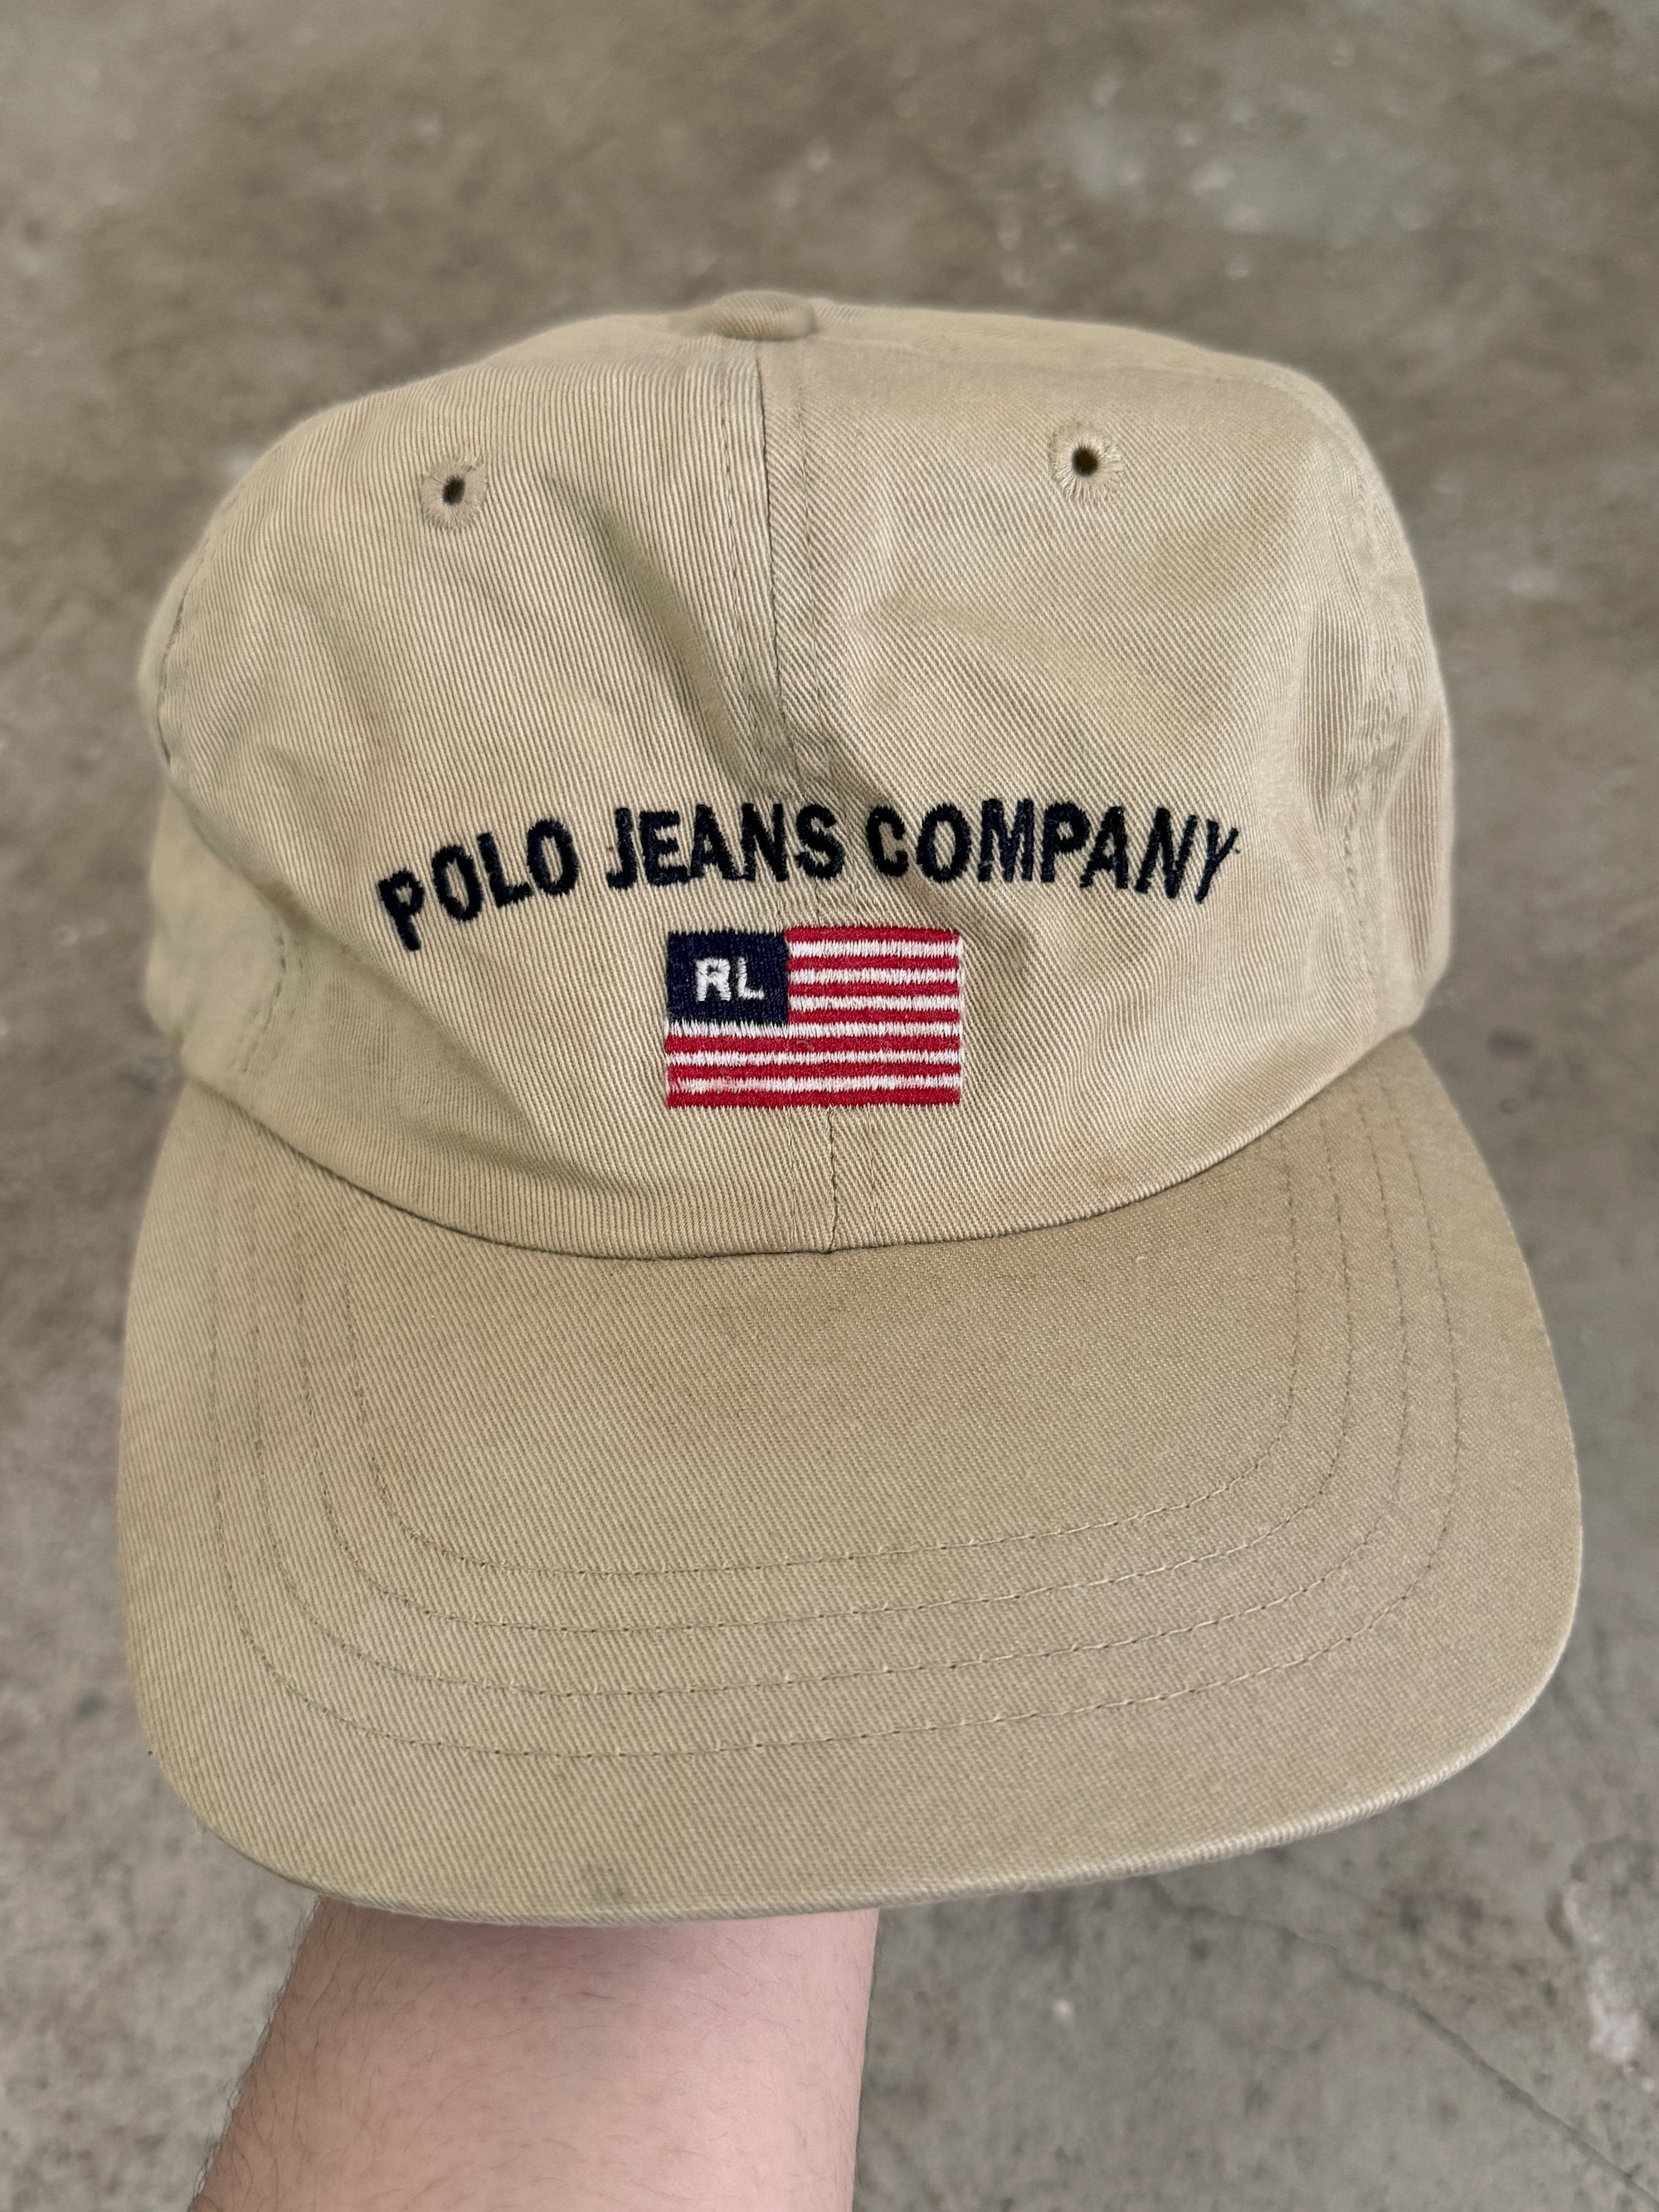 1990s "Polo Jeans Company" Hat